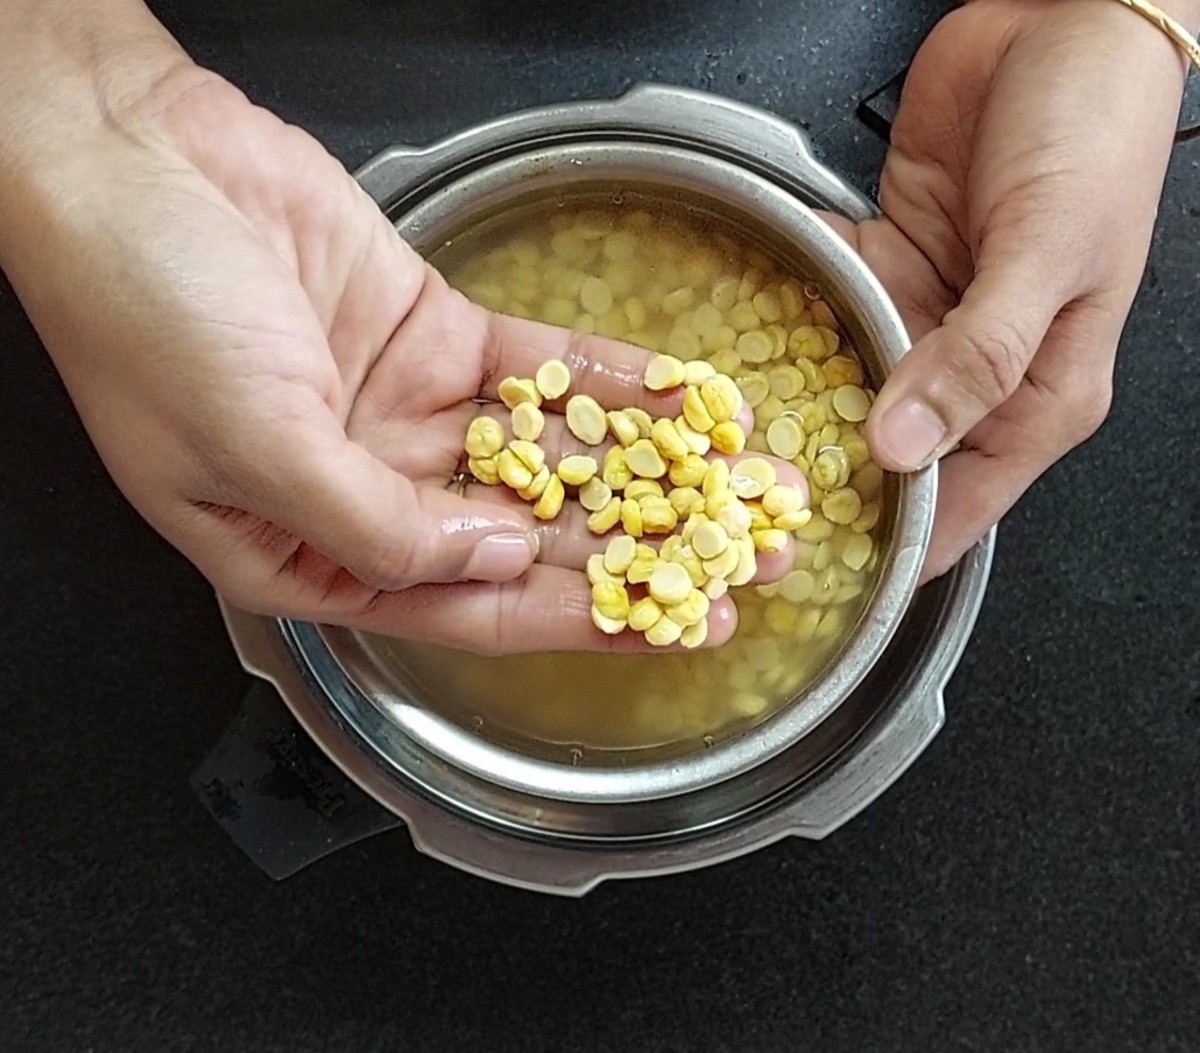 Soak 1 cup of chana dal or bengal gram for 2 hours.